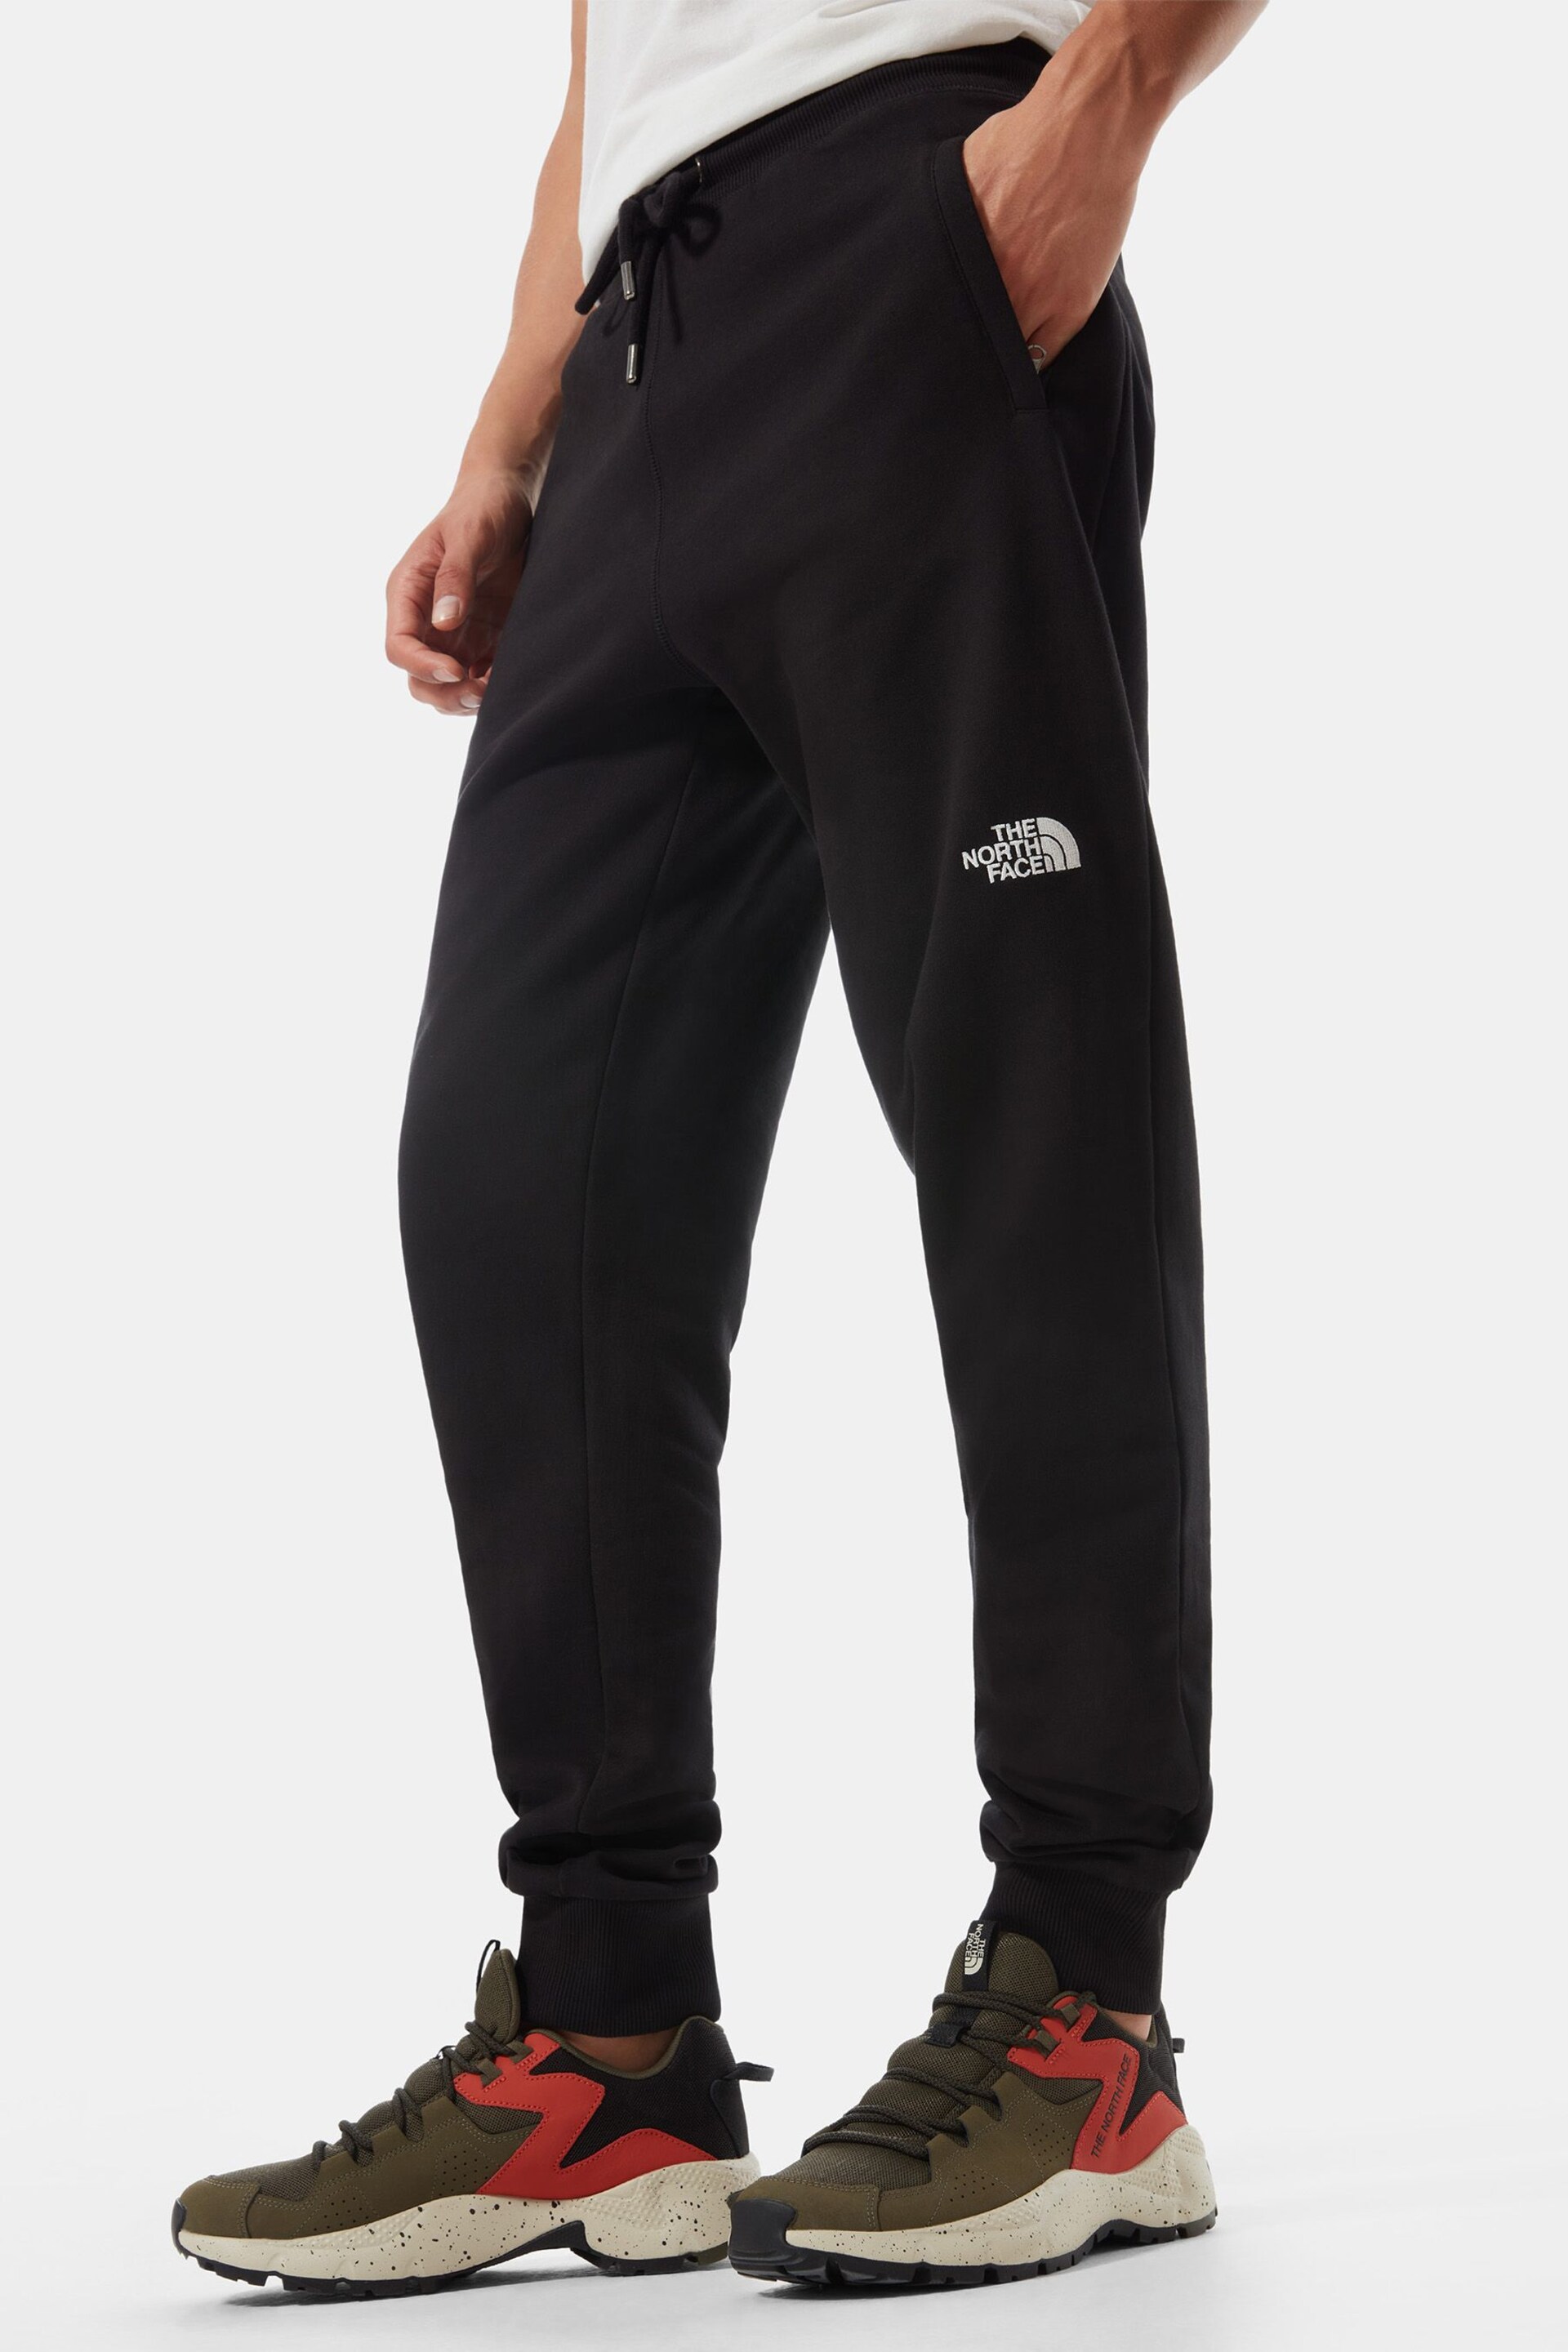 The North Face Black Never Stop Exploring Joggers - Image 1 of 5